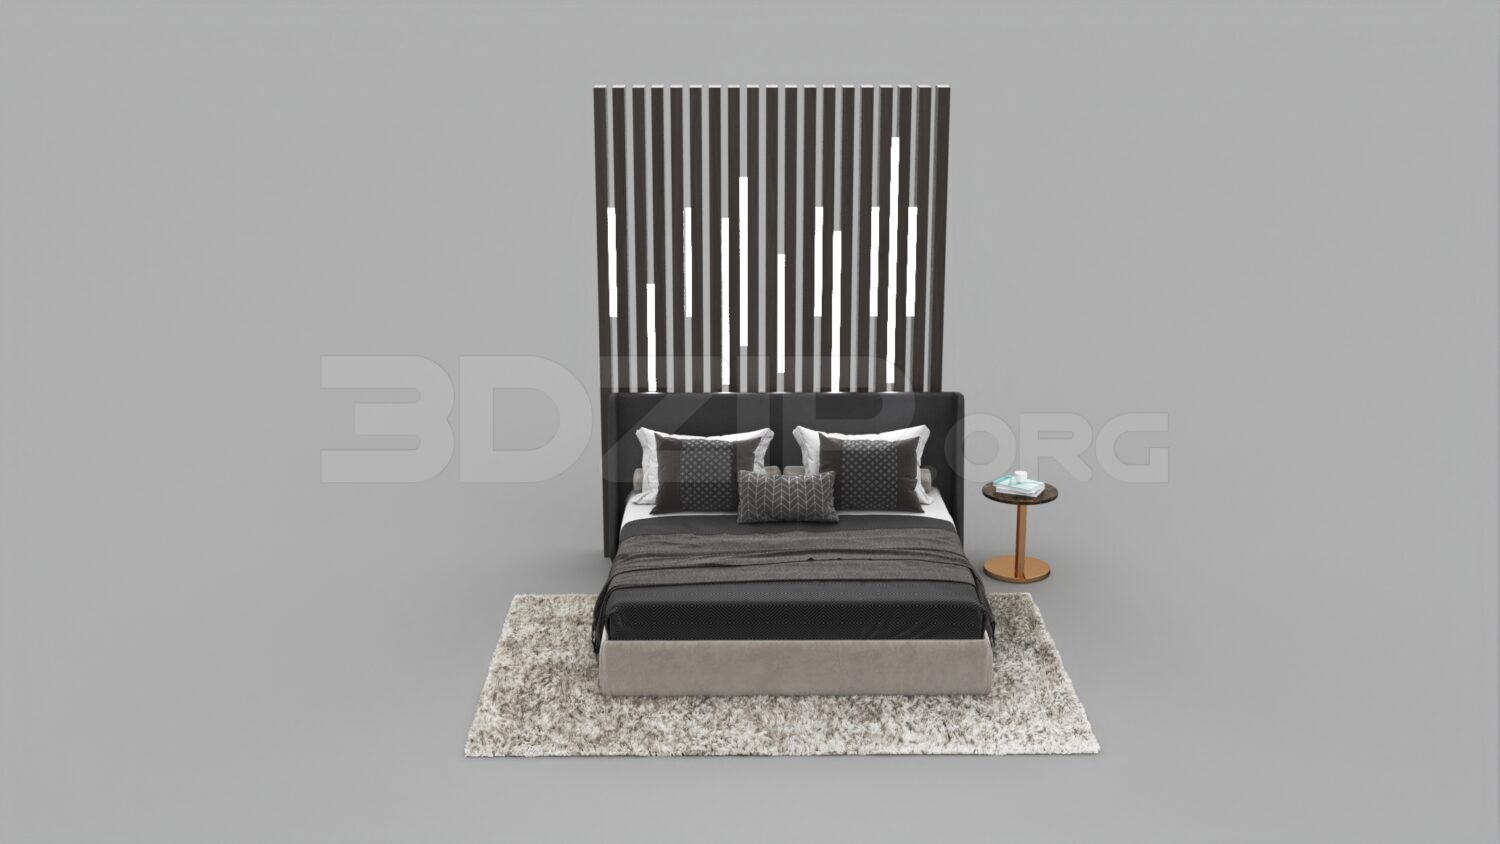 1222. Download Free Bed Model By Huynh Ngoc Thinh